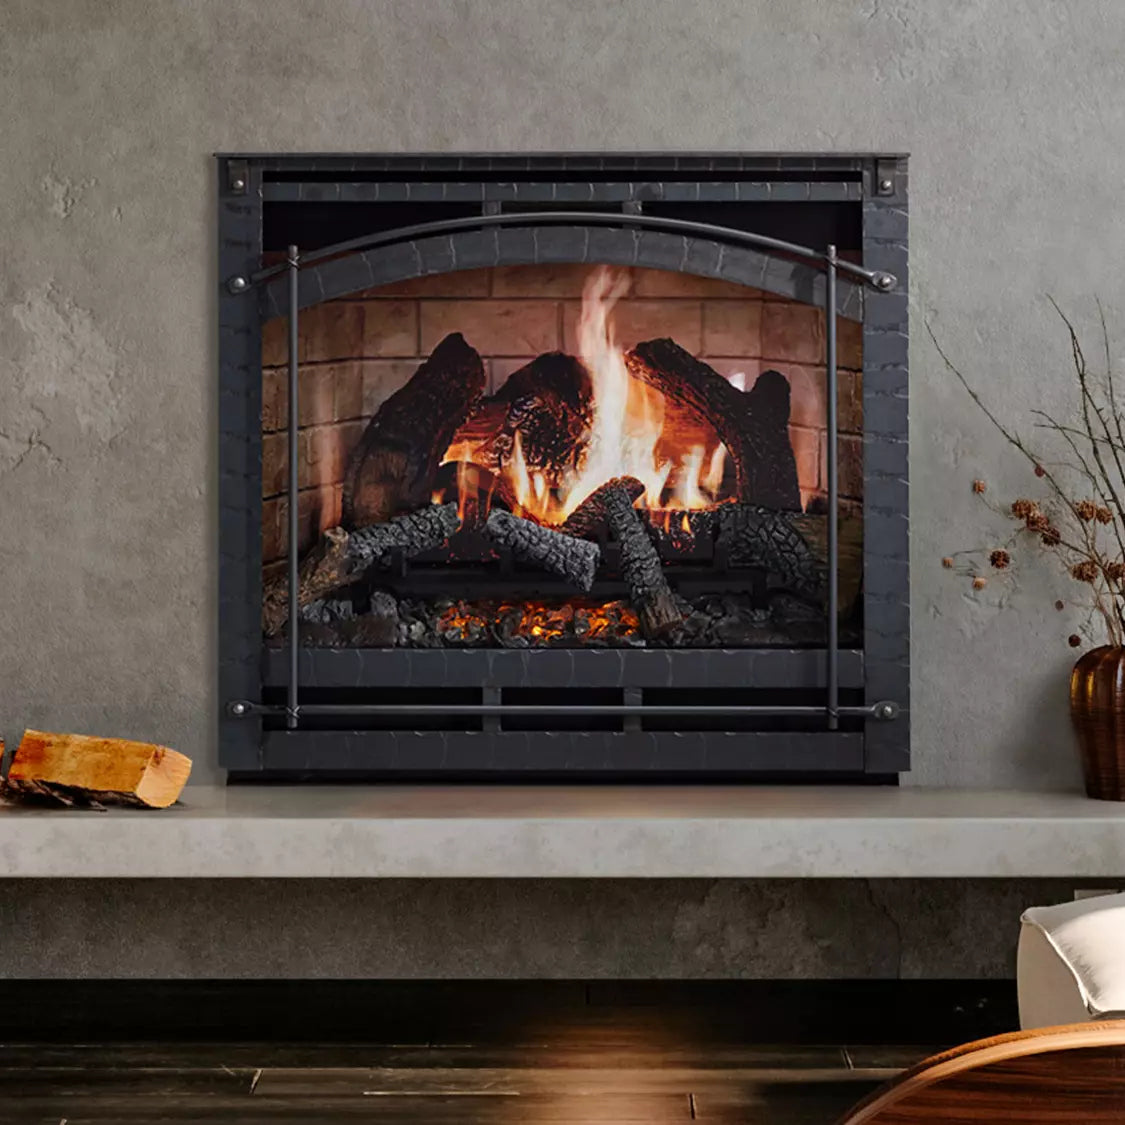 SimpliFire Inception 36" Built-In Electric Fireplace - SF-INC36 with Chateau Forge front